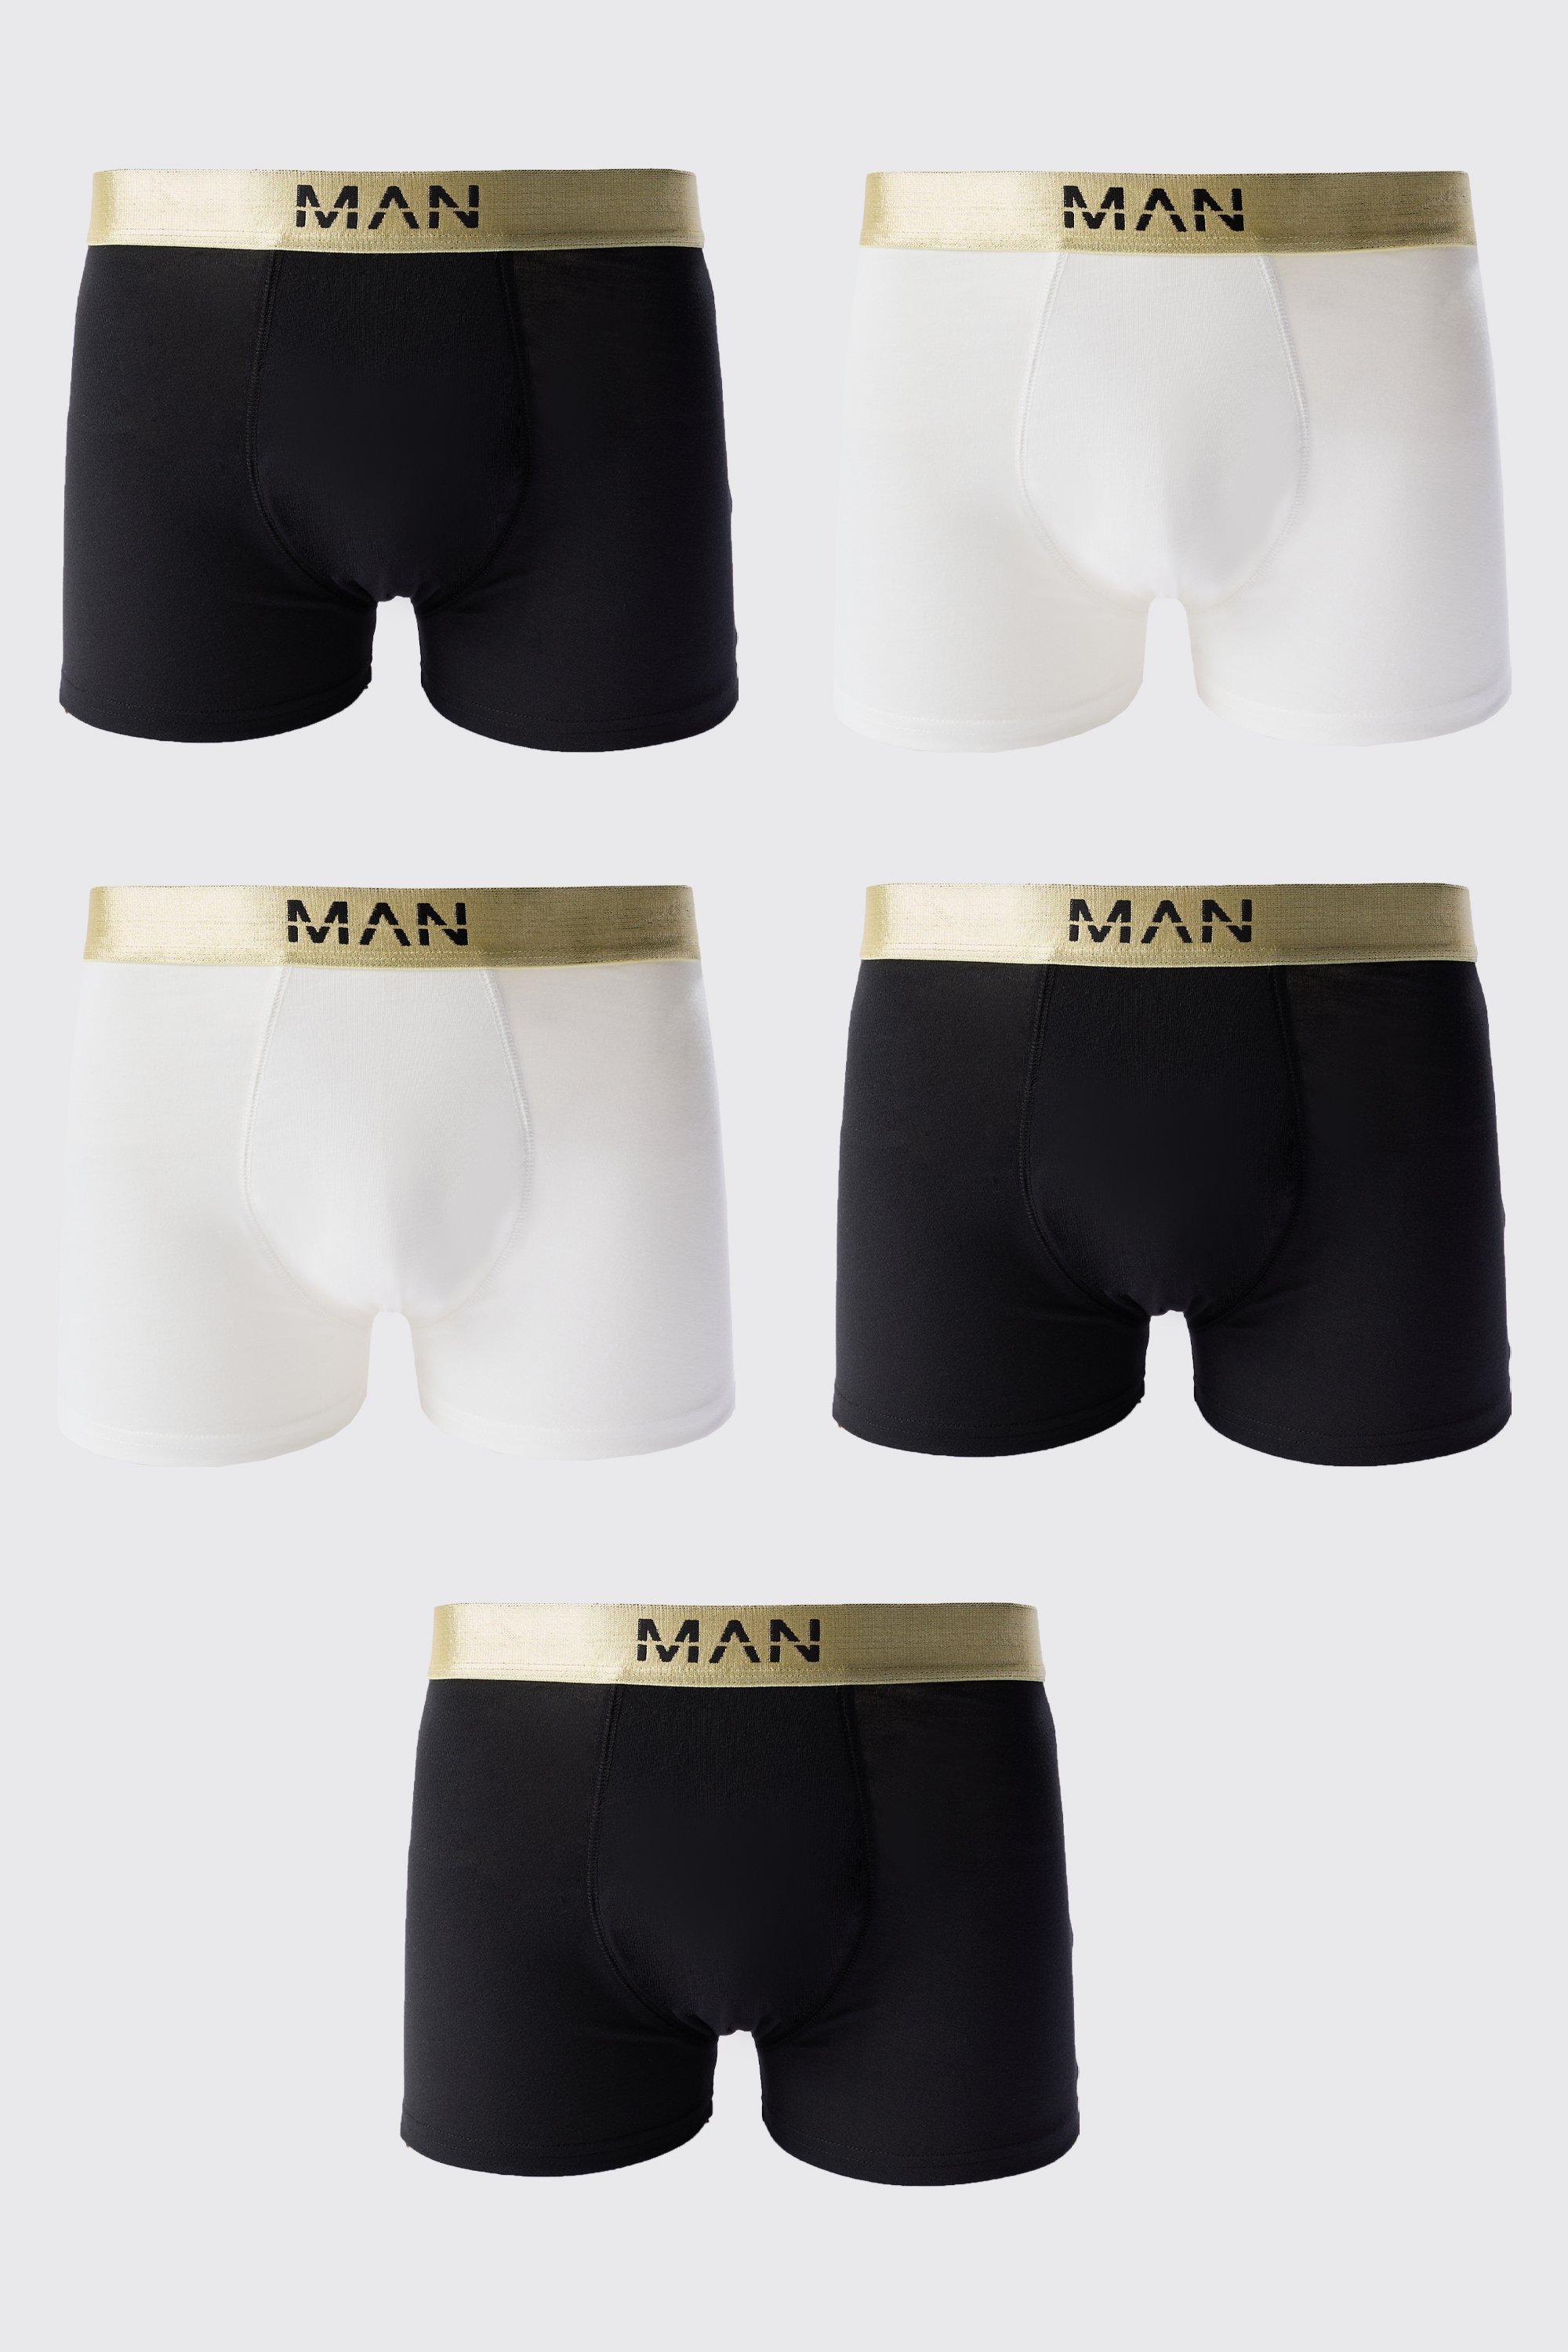 Image of 5 Pack Man Dash Gold Waistband Boxers In Multi, Multi